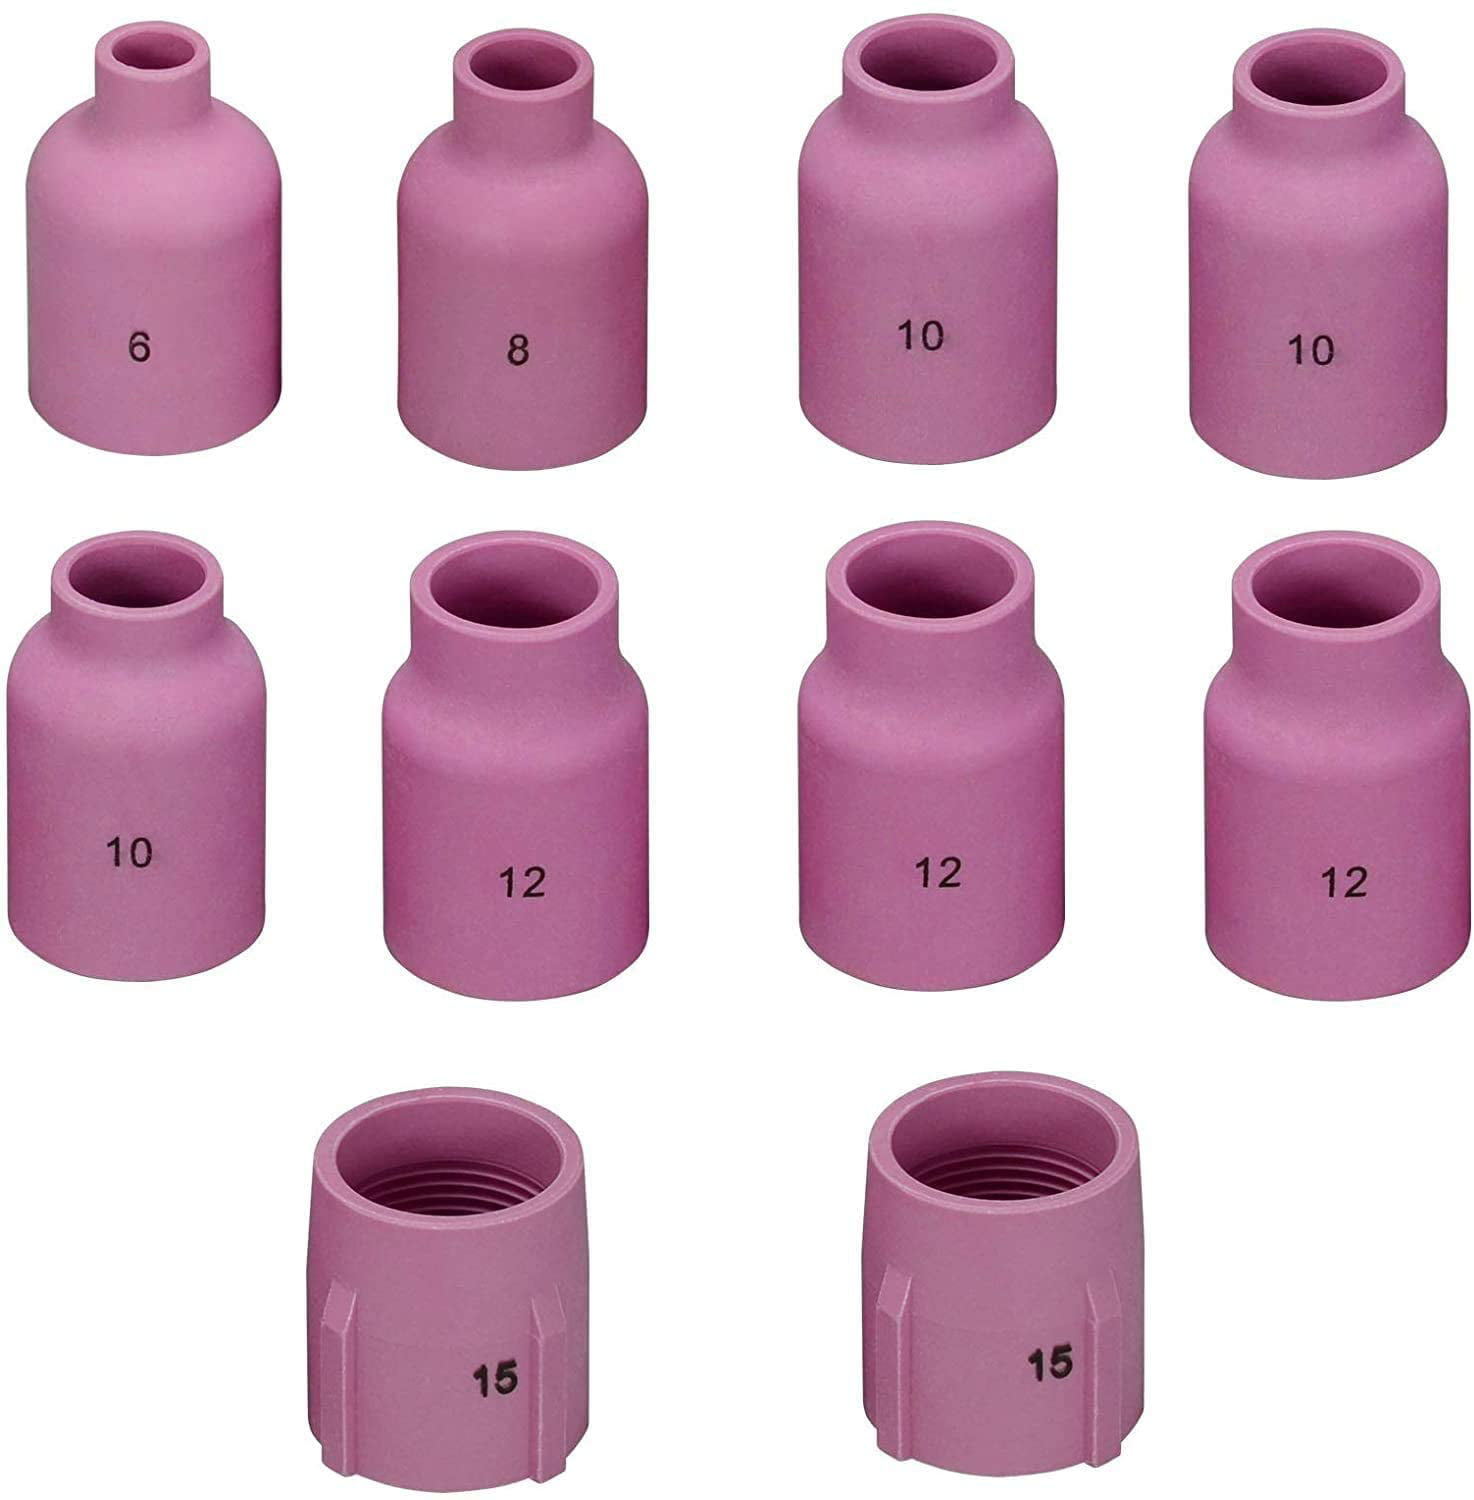 Ceramics Nozzle Gas Lens Cups Fit for WP-9 WP-20 WP-25 Series TIG Welding Torch 